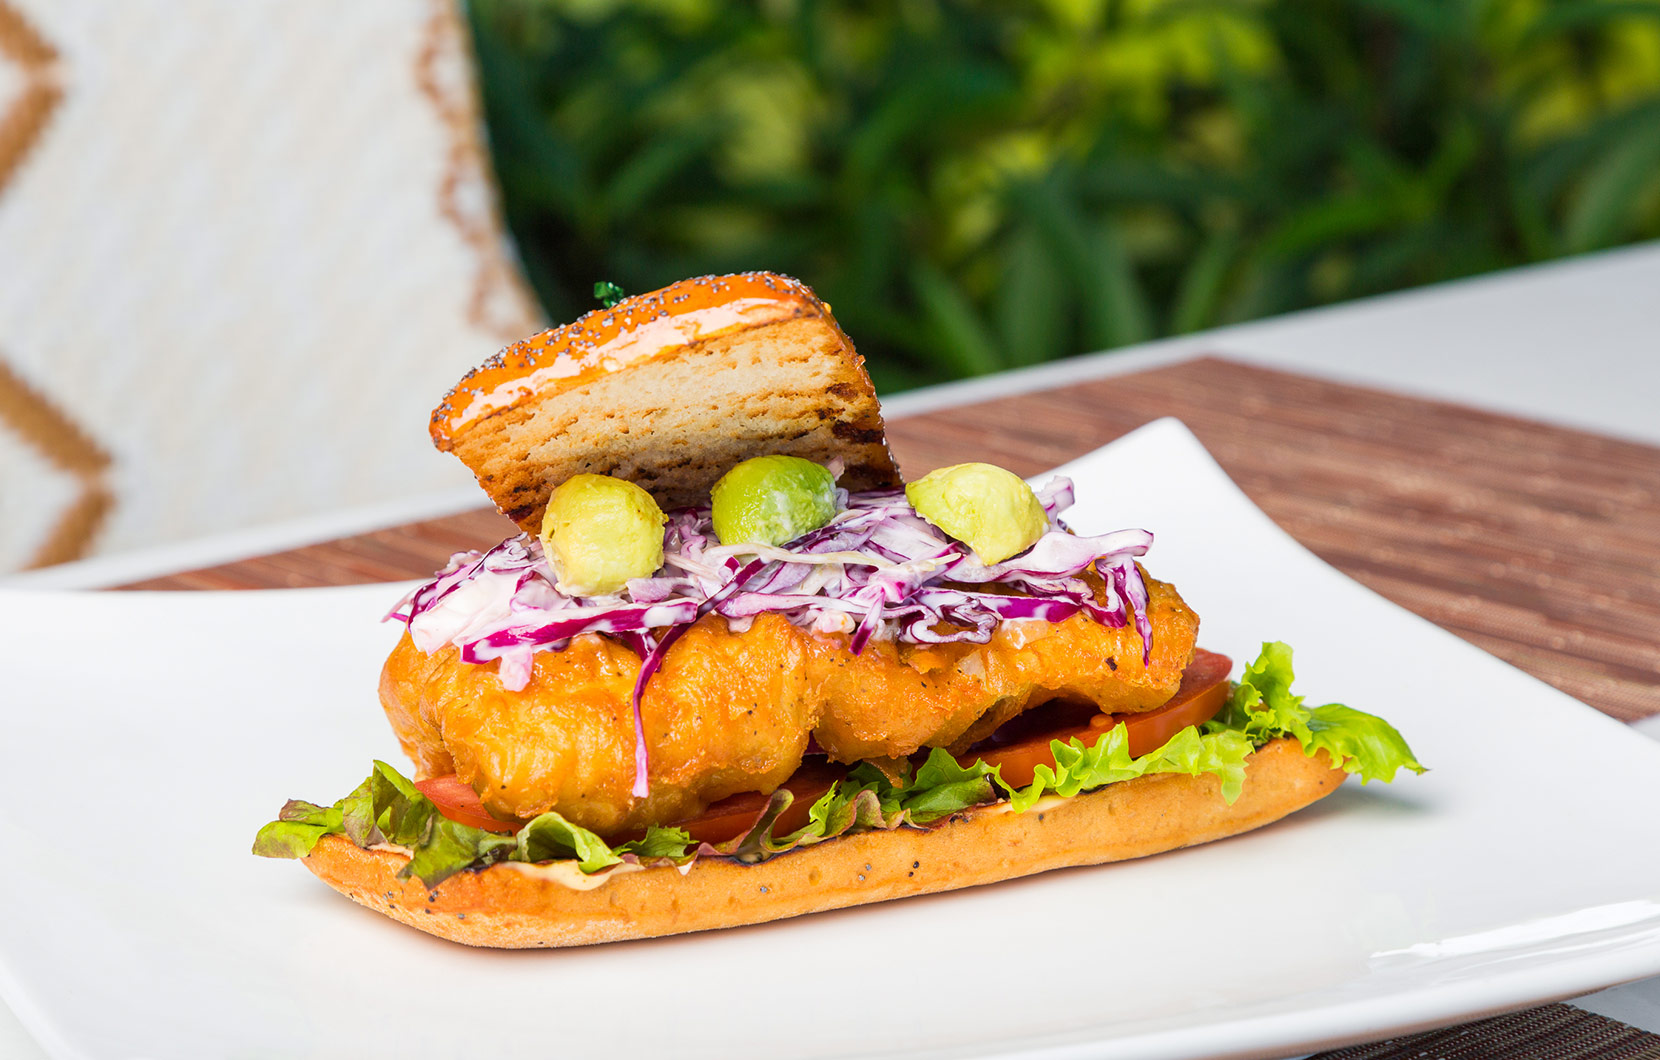 A flaky fish fillet topped with avocado pearls gives Chef Felipe’s burger its character.